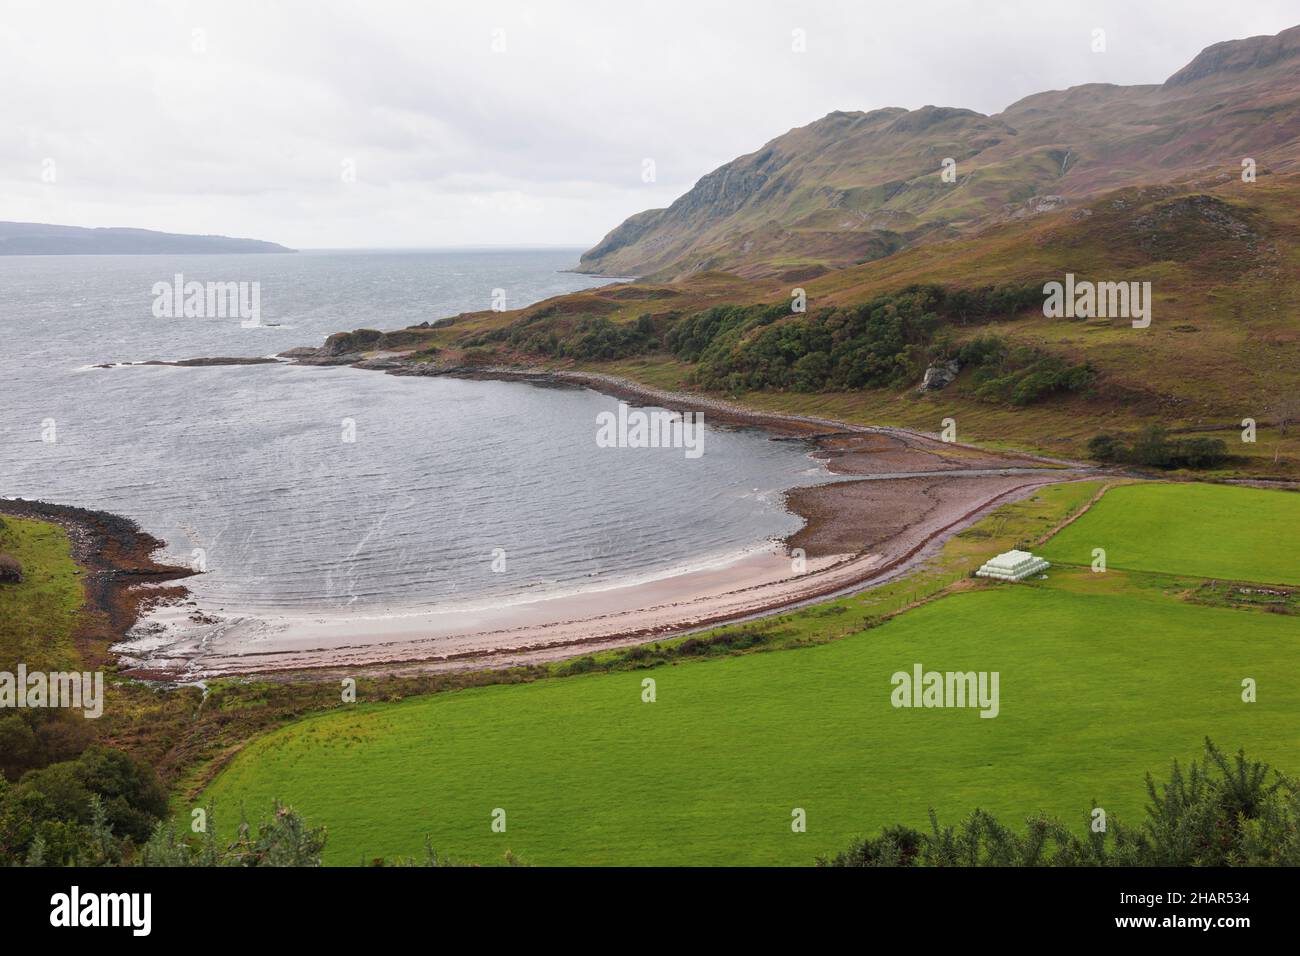 Looking across the beautiful bay known as Camas nan Geall from its panoramic viewing point on the Ardnamurchan Peninsula in West Scotland. Stock Photo